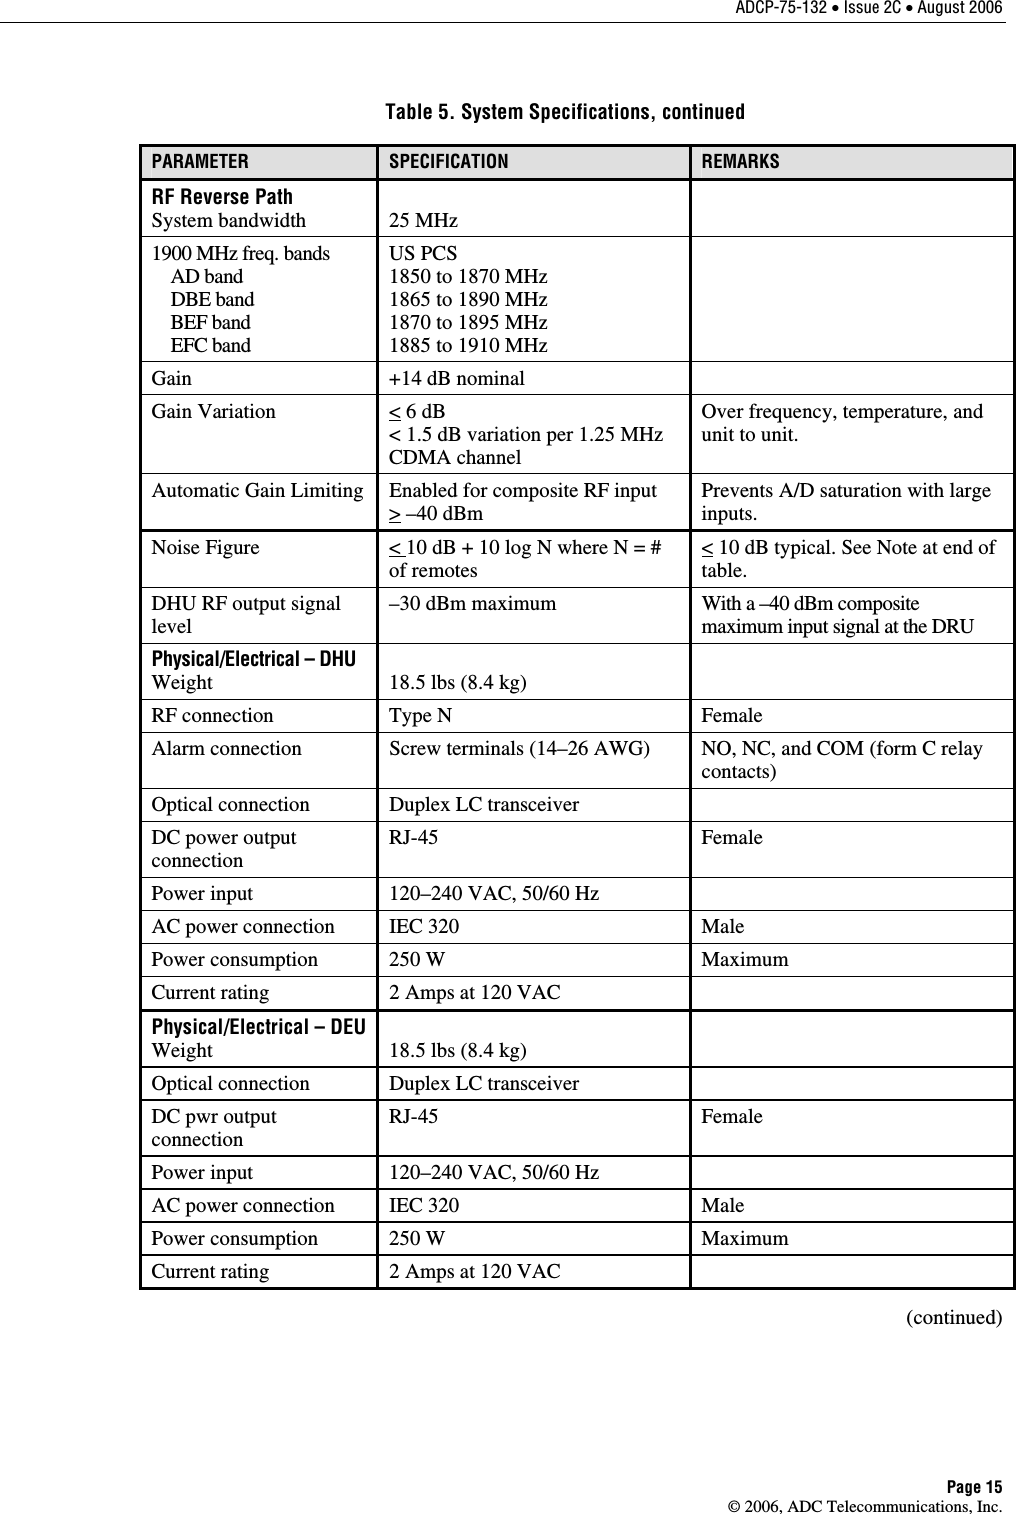 ADCP-75-132 • Issue 2C • August 2006 Page 15 © 2006, ADC Telecommunications, Inc. Table 5. System Specifications, continued PARAMETER  SPECIFICATION  REMARKS RF Reverse Path System bandwidth  25 MHz  1900 MHz freq. bands     AD band     DBE band     BEF band     EFC band US PCS 1850 to 1870 MHz 1865 to 1890 MHz 1870 to 1895 MHz 1885 to 1910 MHz  Gain  +14 dB nominal   Gain Variation  &lt; 6 dB &lt; 1.5 dB variation per 1.25 MHz CDMA channel Over frequency, temperature, and unit to unit.  Automatic Gain Limiting  Enabled for composite RF input &gt; –40 dBm Prevents A/D saturation with large inputs. Noise Figure  &lt; 10 dB + 10 log N where N = # of remotes &lt; 10 dB typical. See Note at end of table.  DHU RF output signal level –30 dBm maximum  With a –40 dBm composite maximum input signal at the DRU Physical/Electrical – DHU Weight  18.5 lbs (8.4 kg)  RF connection  Type N   Female Alarm connection  Screw terminals (14–26 AWG)  NO, NC, and COM (form C relay contacts) Optical connection  Duplex LC transceiver   DC power output connection RJ-45 Female Power input  120–240 VAC, 50/60 Hz   AC power connection  IEC 320  Male Power consumption  250 W  Maximum Current rating  2 Amps at 120 VAC   Physical/Electrical – DEUWeight  18.5 lbs (8.4 kg)  Optical connection  Duplex LC transceiver   DC pwr output connection RJ-45 Female Power input  120–240 VAC, 50/60 Hz   AC power connection  IEC 320  Male Power consumption  250 W  Maximum Current rating  2 Amps at 120 VAC   (continued)  